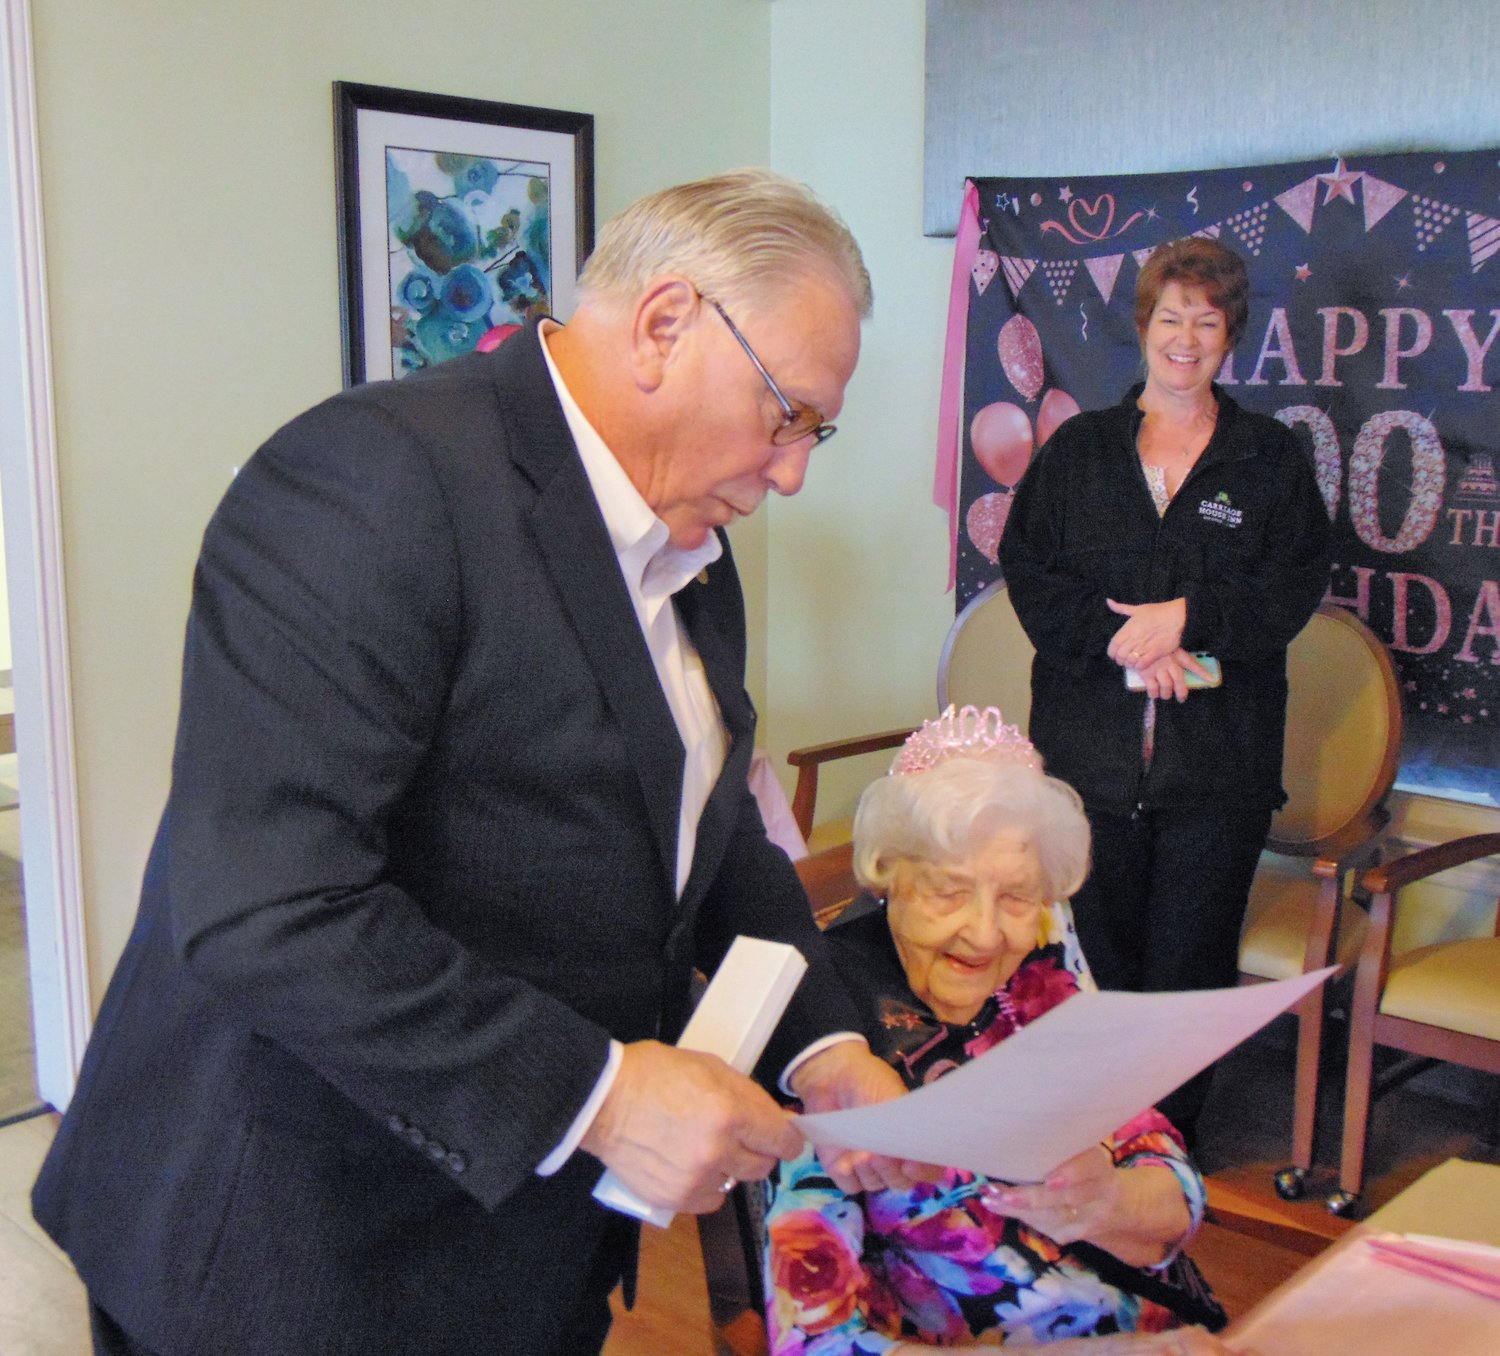 Mayor Randy Carroll read a proclamation declaring Christine one of Shelbyville’s centenarians.